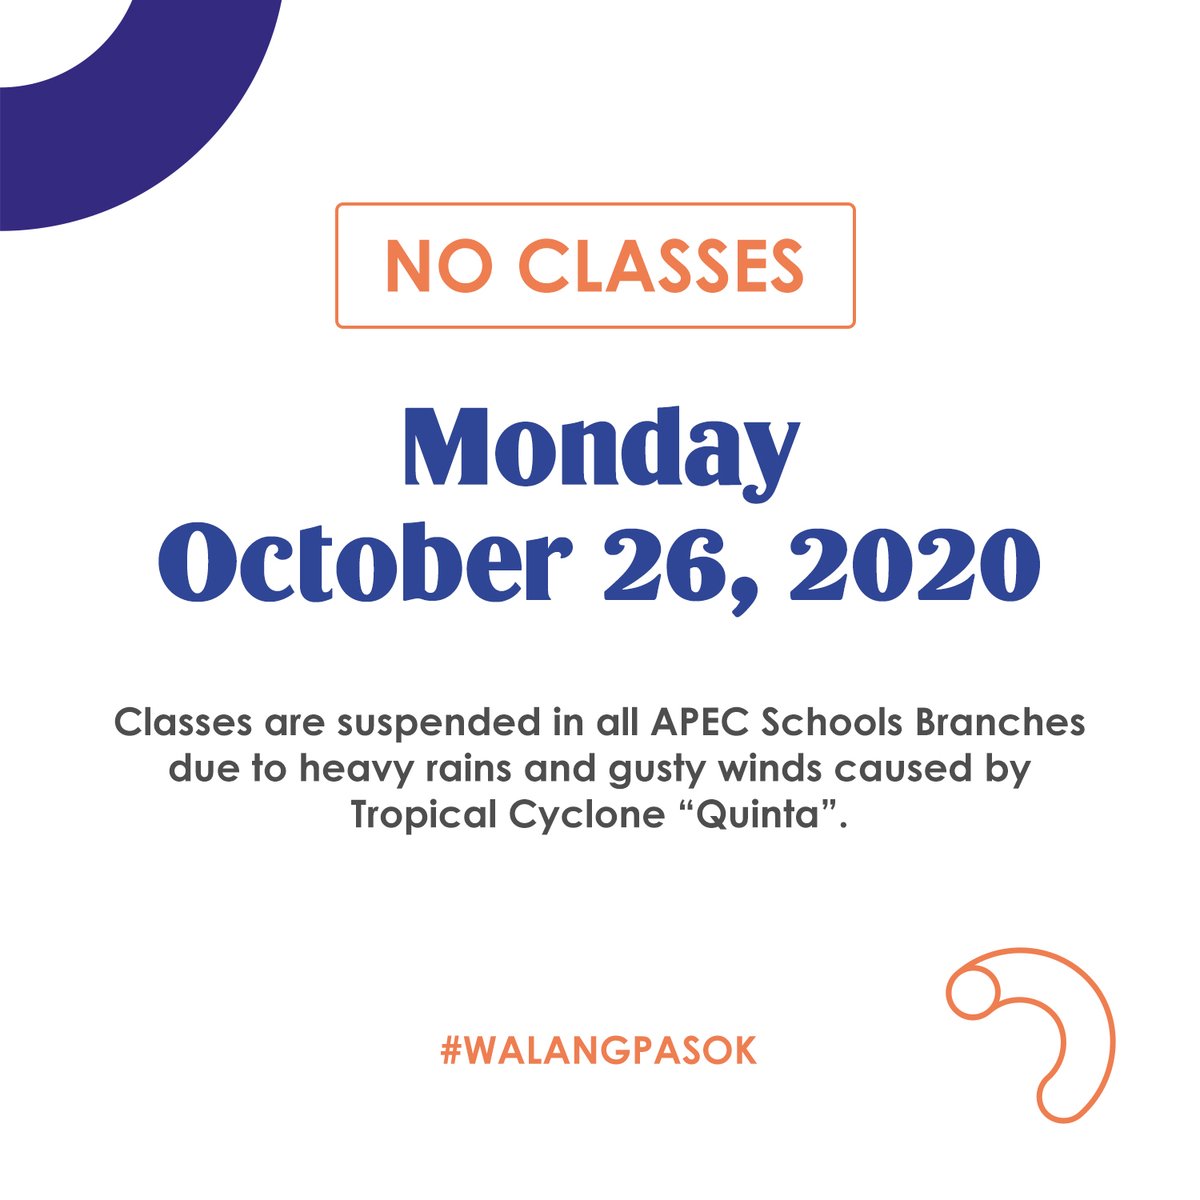 Classes are suspended in all APEC Schools Branches tomorrow, Oct 26, 2020 due to heavy rains and gusty winds caused by Tropical Cyclone “Quinta” that may lead to power interruption and internet connectivity problems.  Stay safe.

#TyphoonQuinta 
#TyphoonQuintaUpdate
#WalangPasok